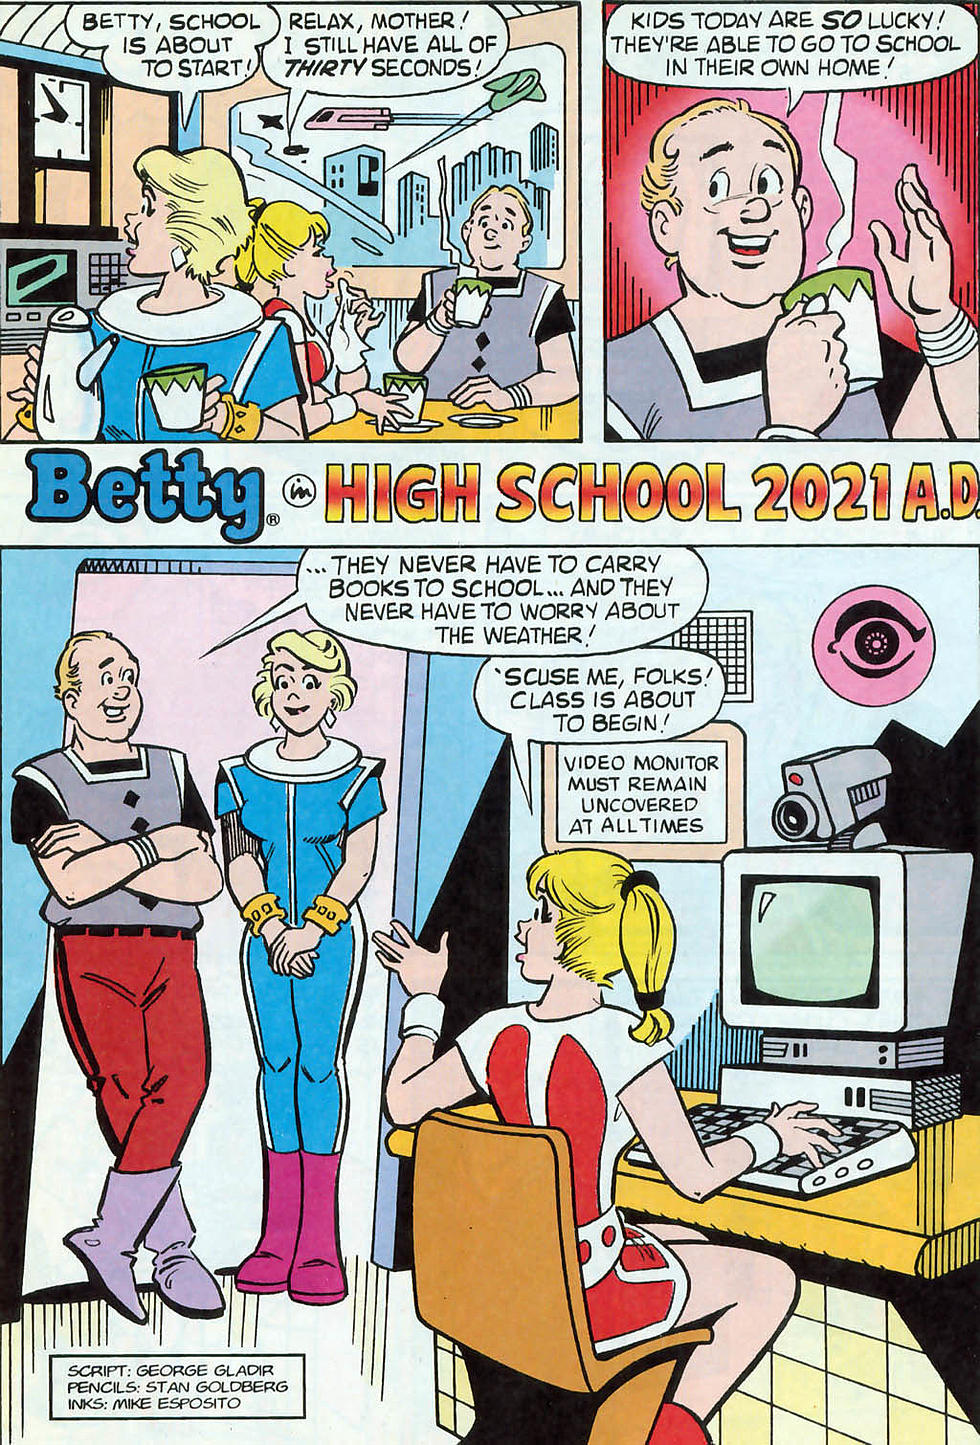 Did Archie Comics Predict the Pandemic in 1997?